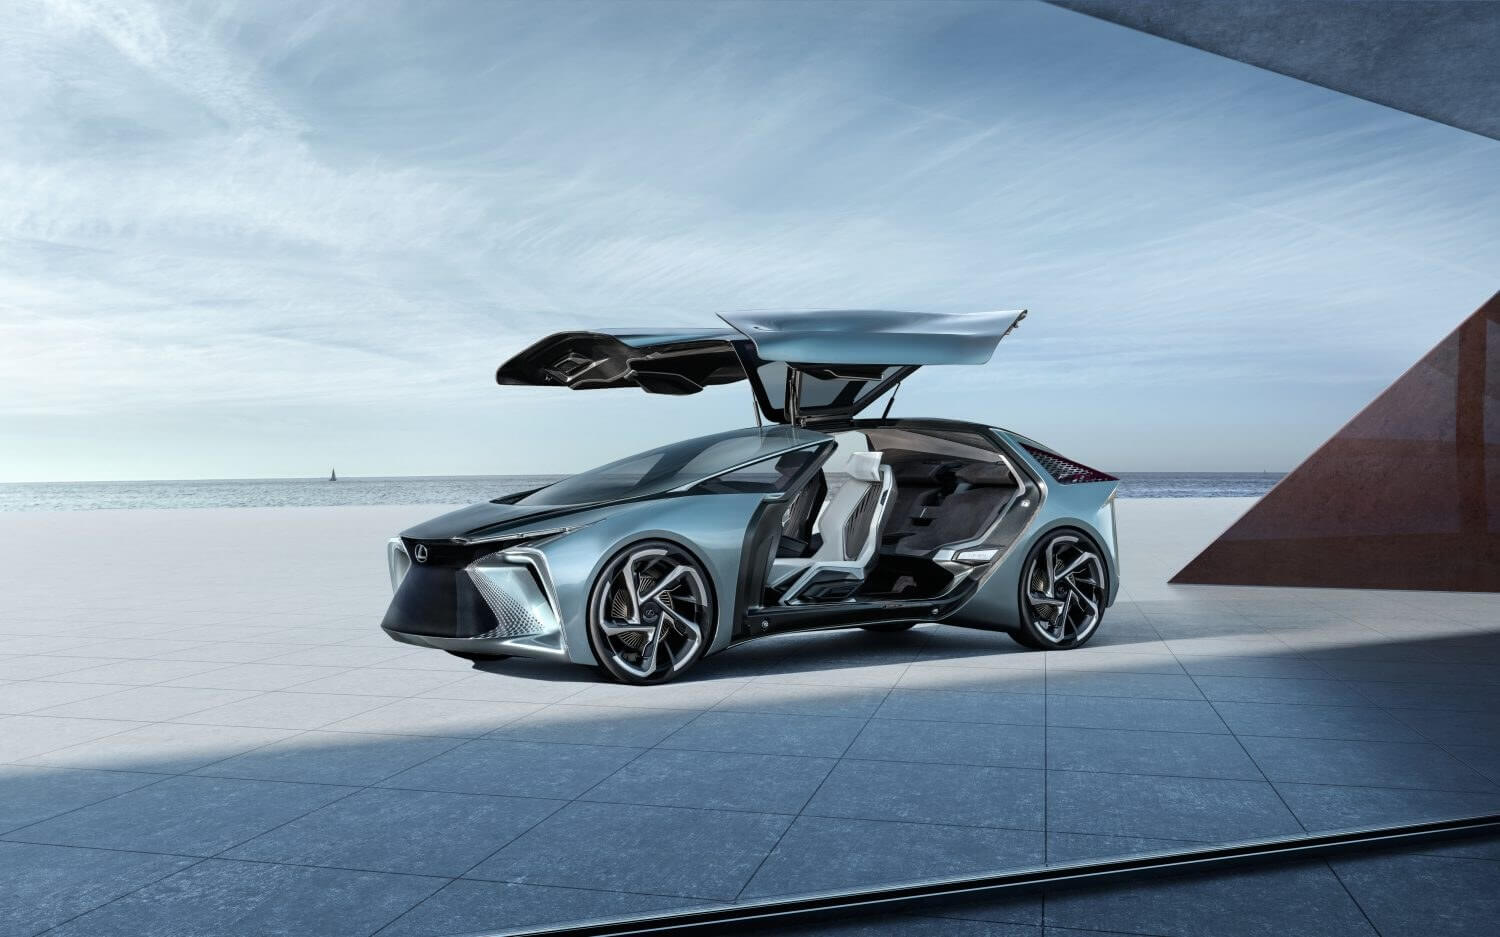 Lexus 'LF-30' electric vehicle concept boasts 'artificial muscle technology' and drone support